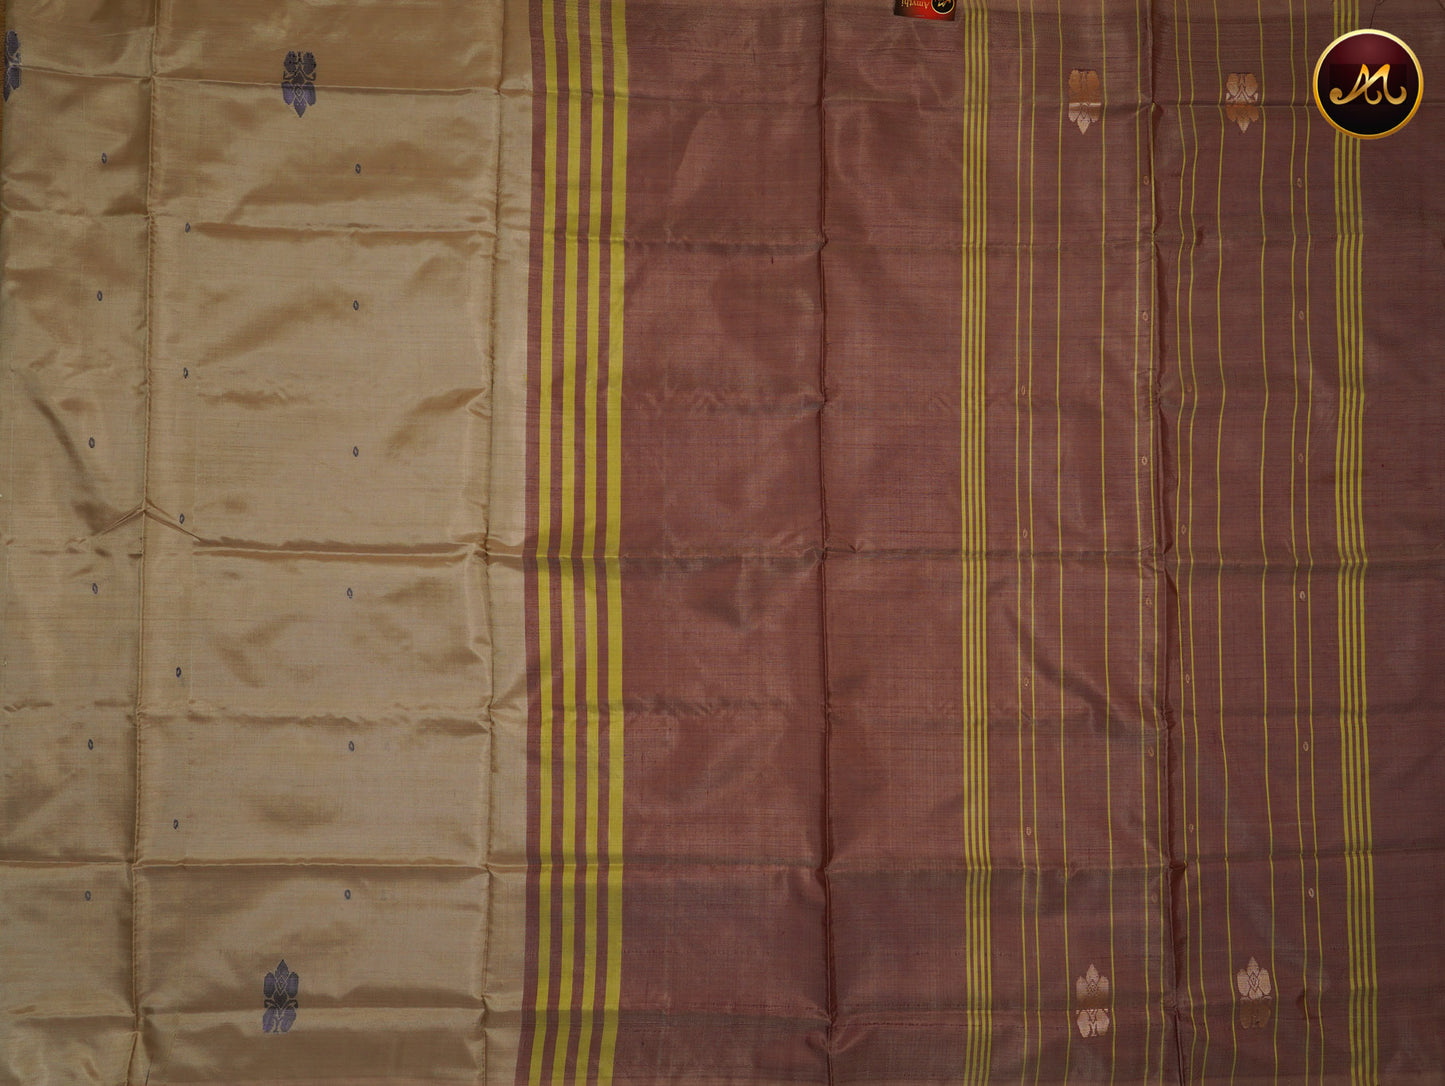 Banana silk saree in beige and pale maroon combination with thread work motifs